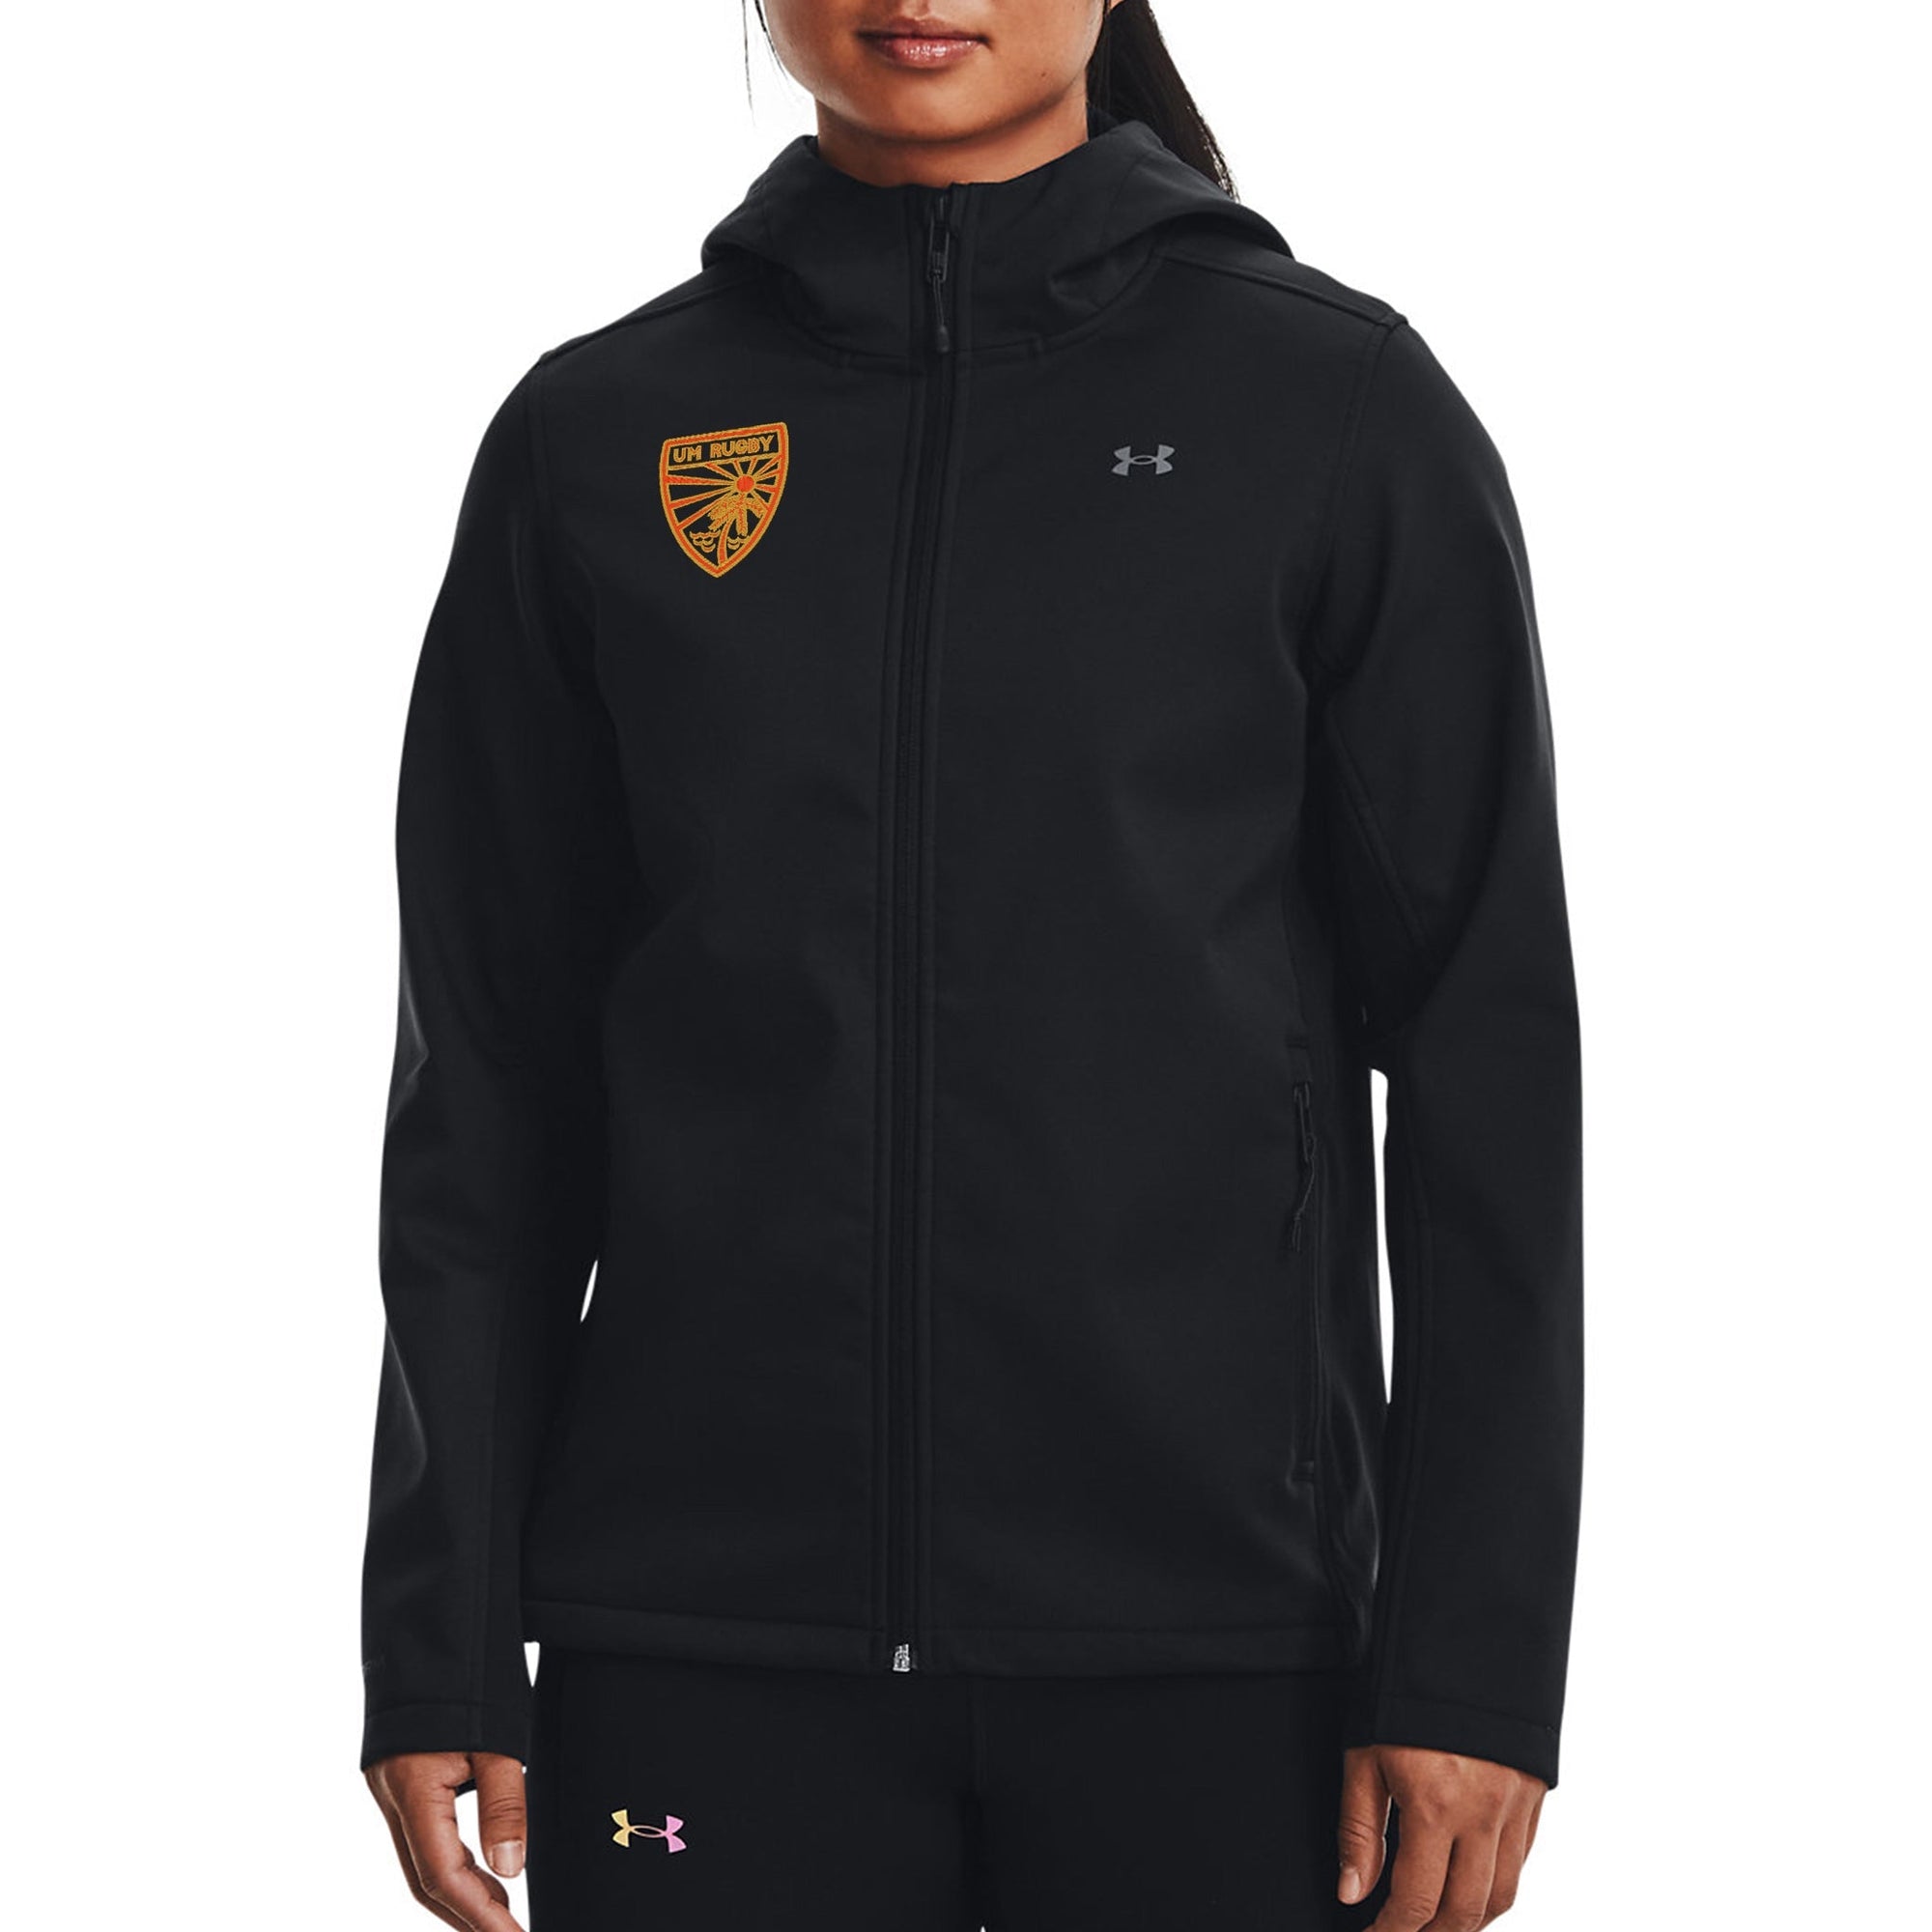 Rugby Imports UMiami Rugby UA Women's CGI Hooded Jacket